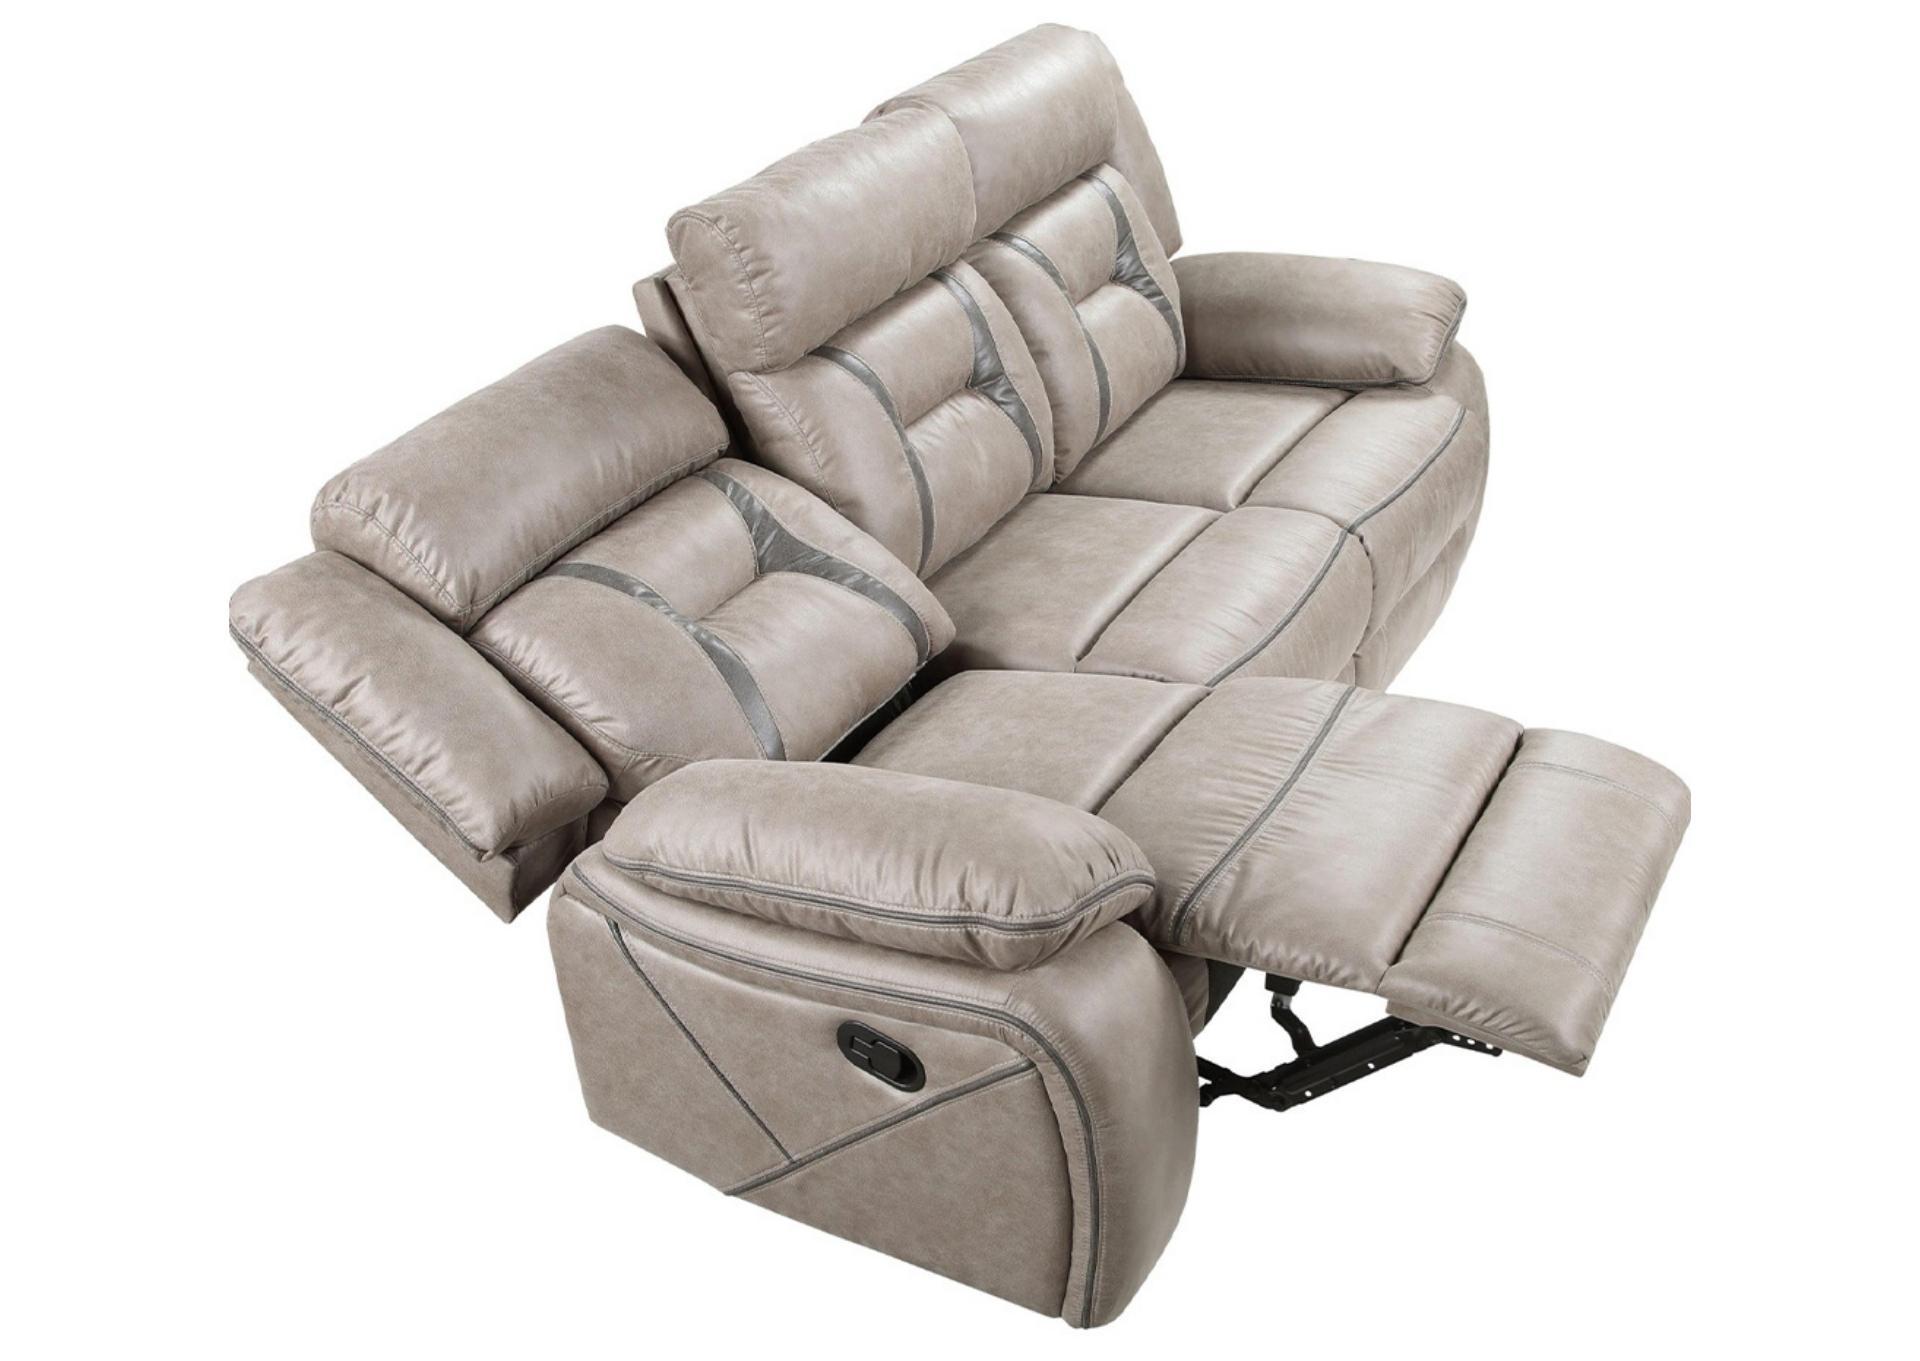 TYSON RECLINING SOFA WITH DROP DOWN CONSOLE,STEVE SILVER COMPANY